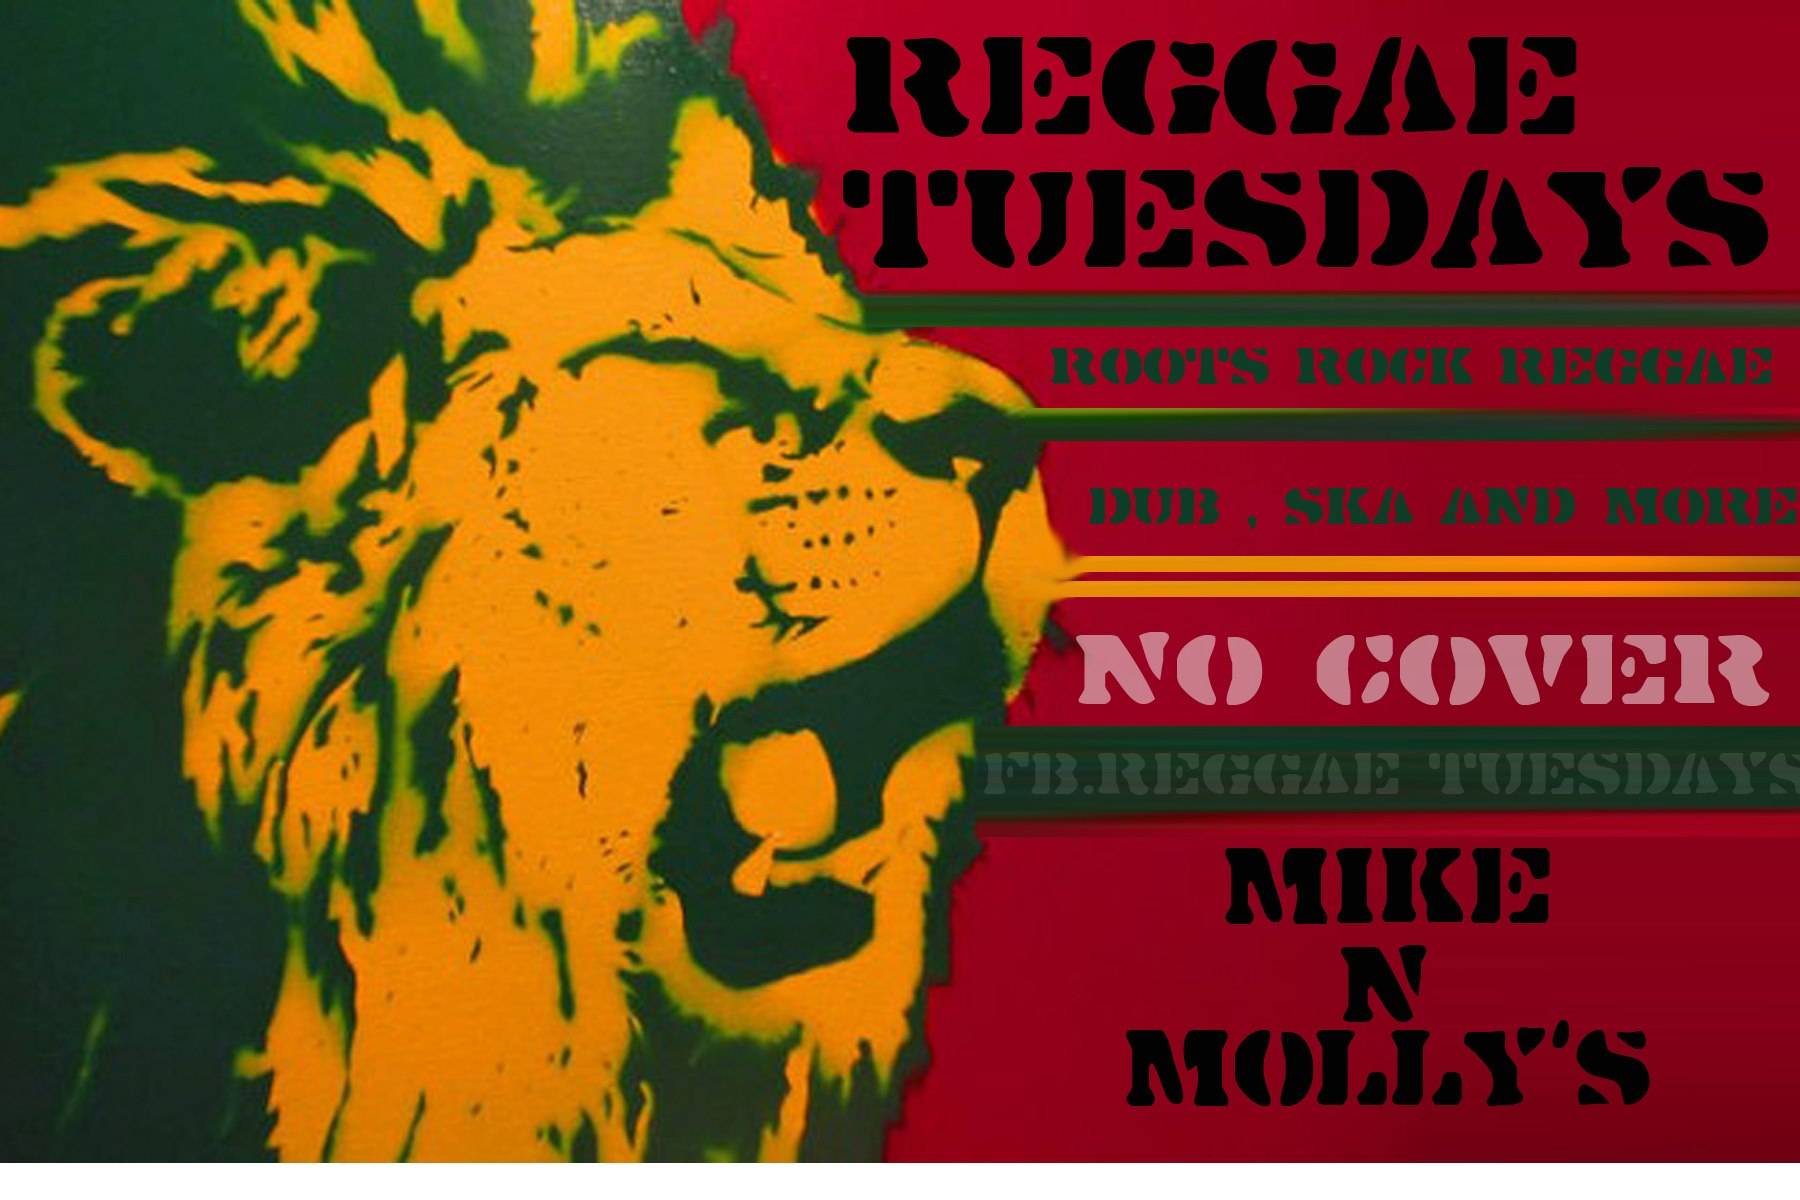 Filling the void with reggae jams